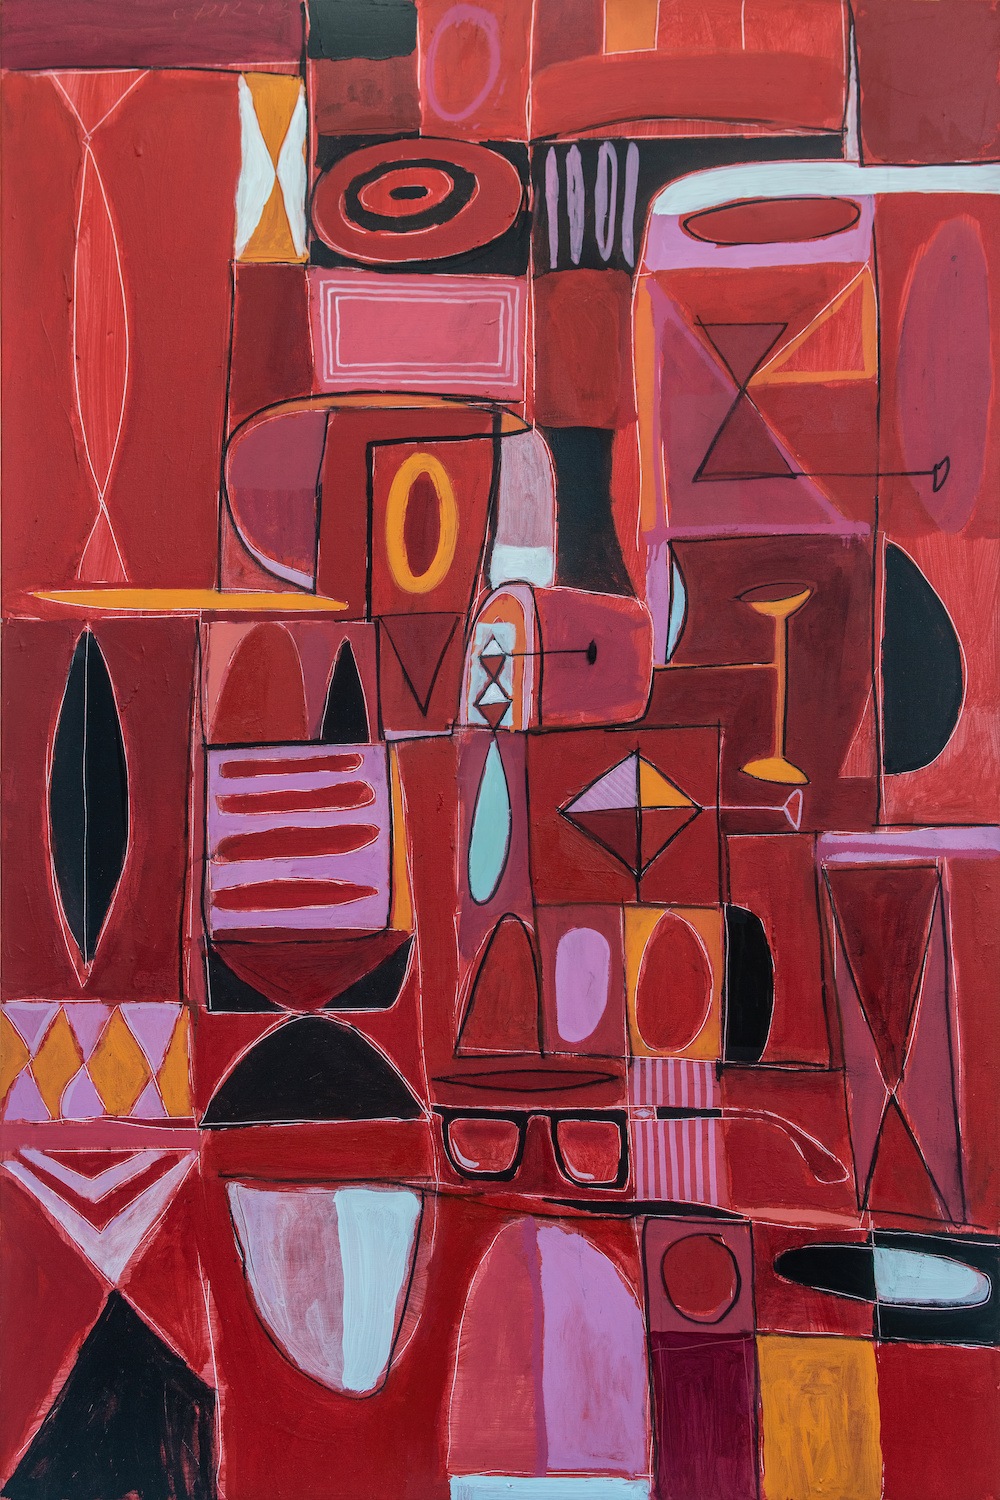 An abstract painting of geometric shapes in red, black, and orange hues.